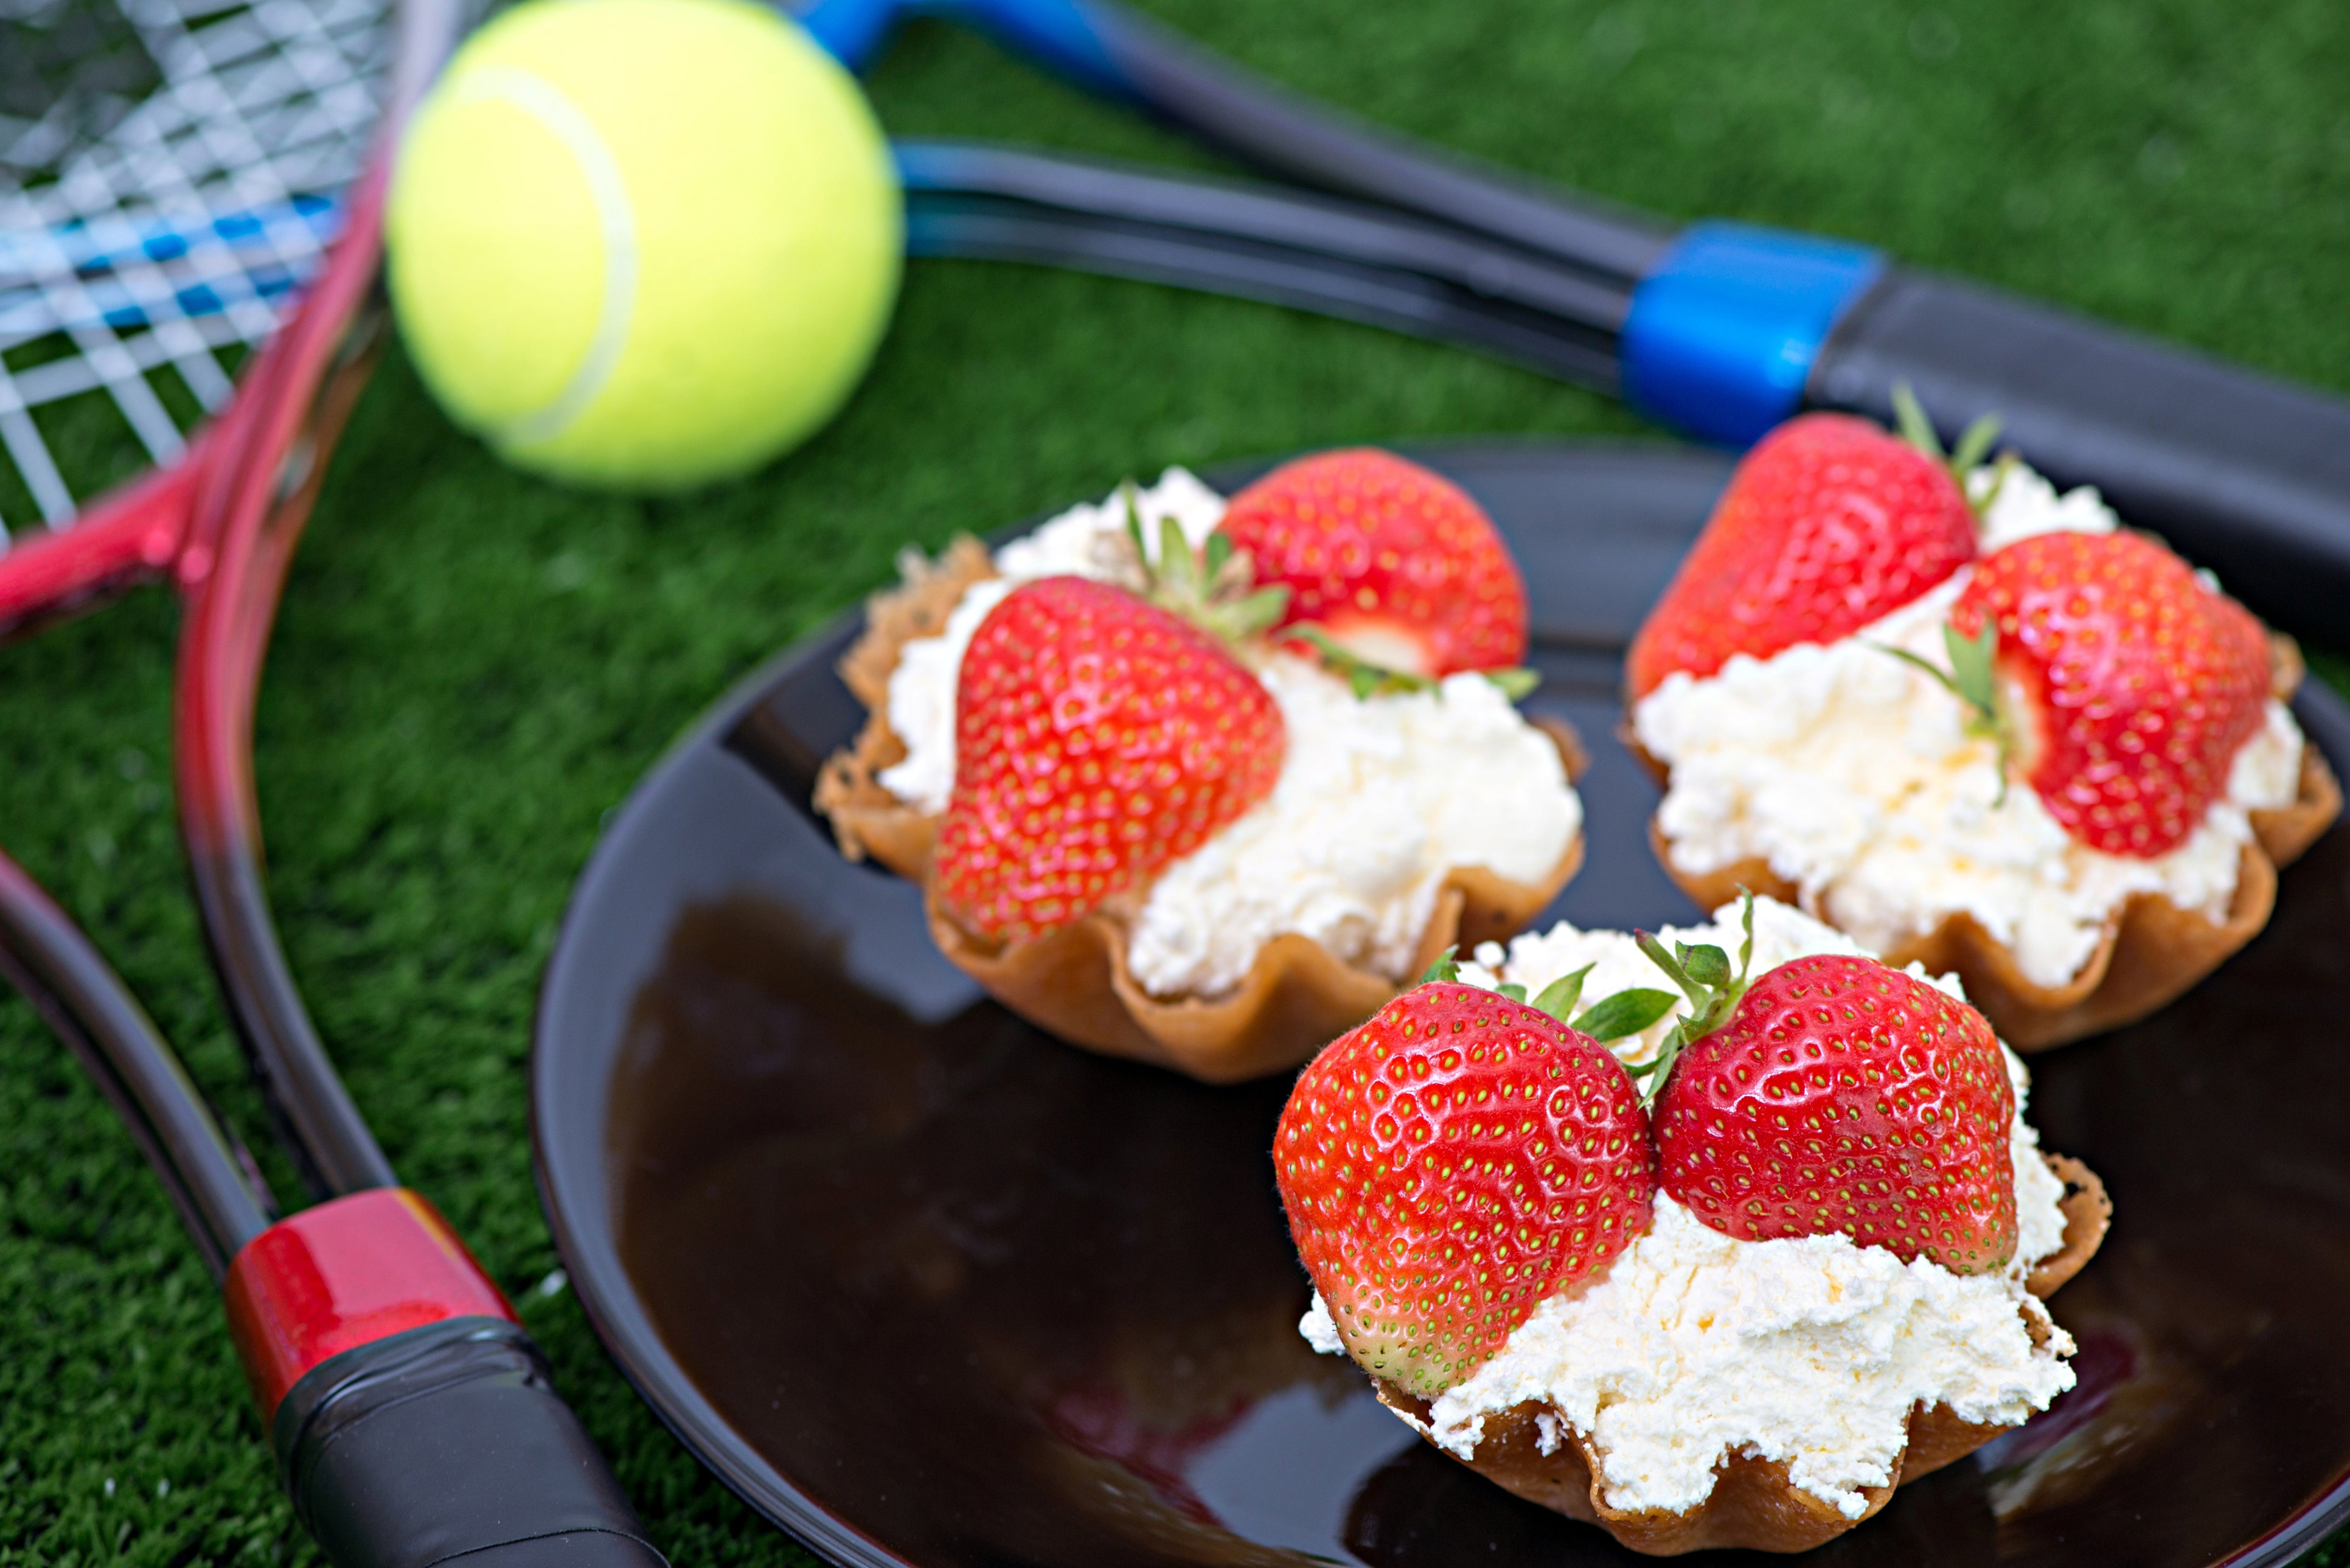 The sweet treat is synonymous with Wimbledon